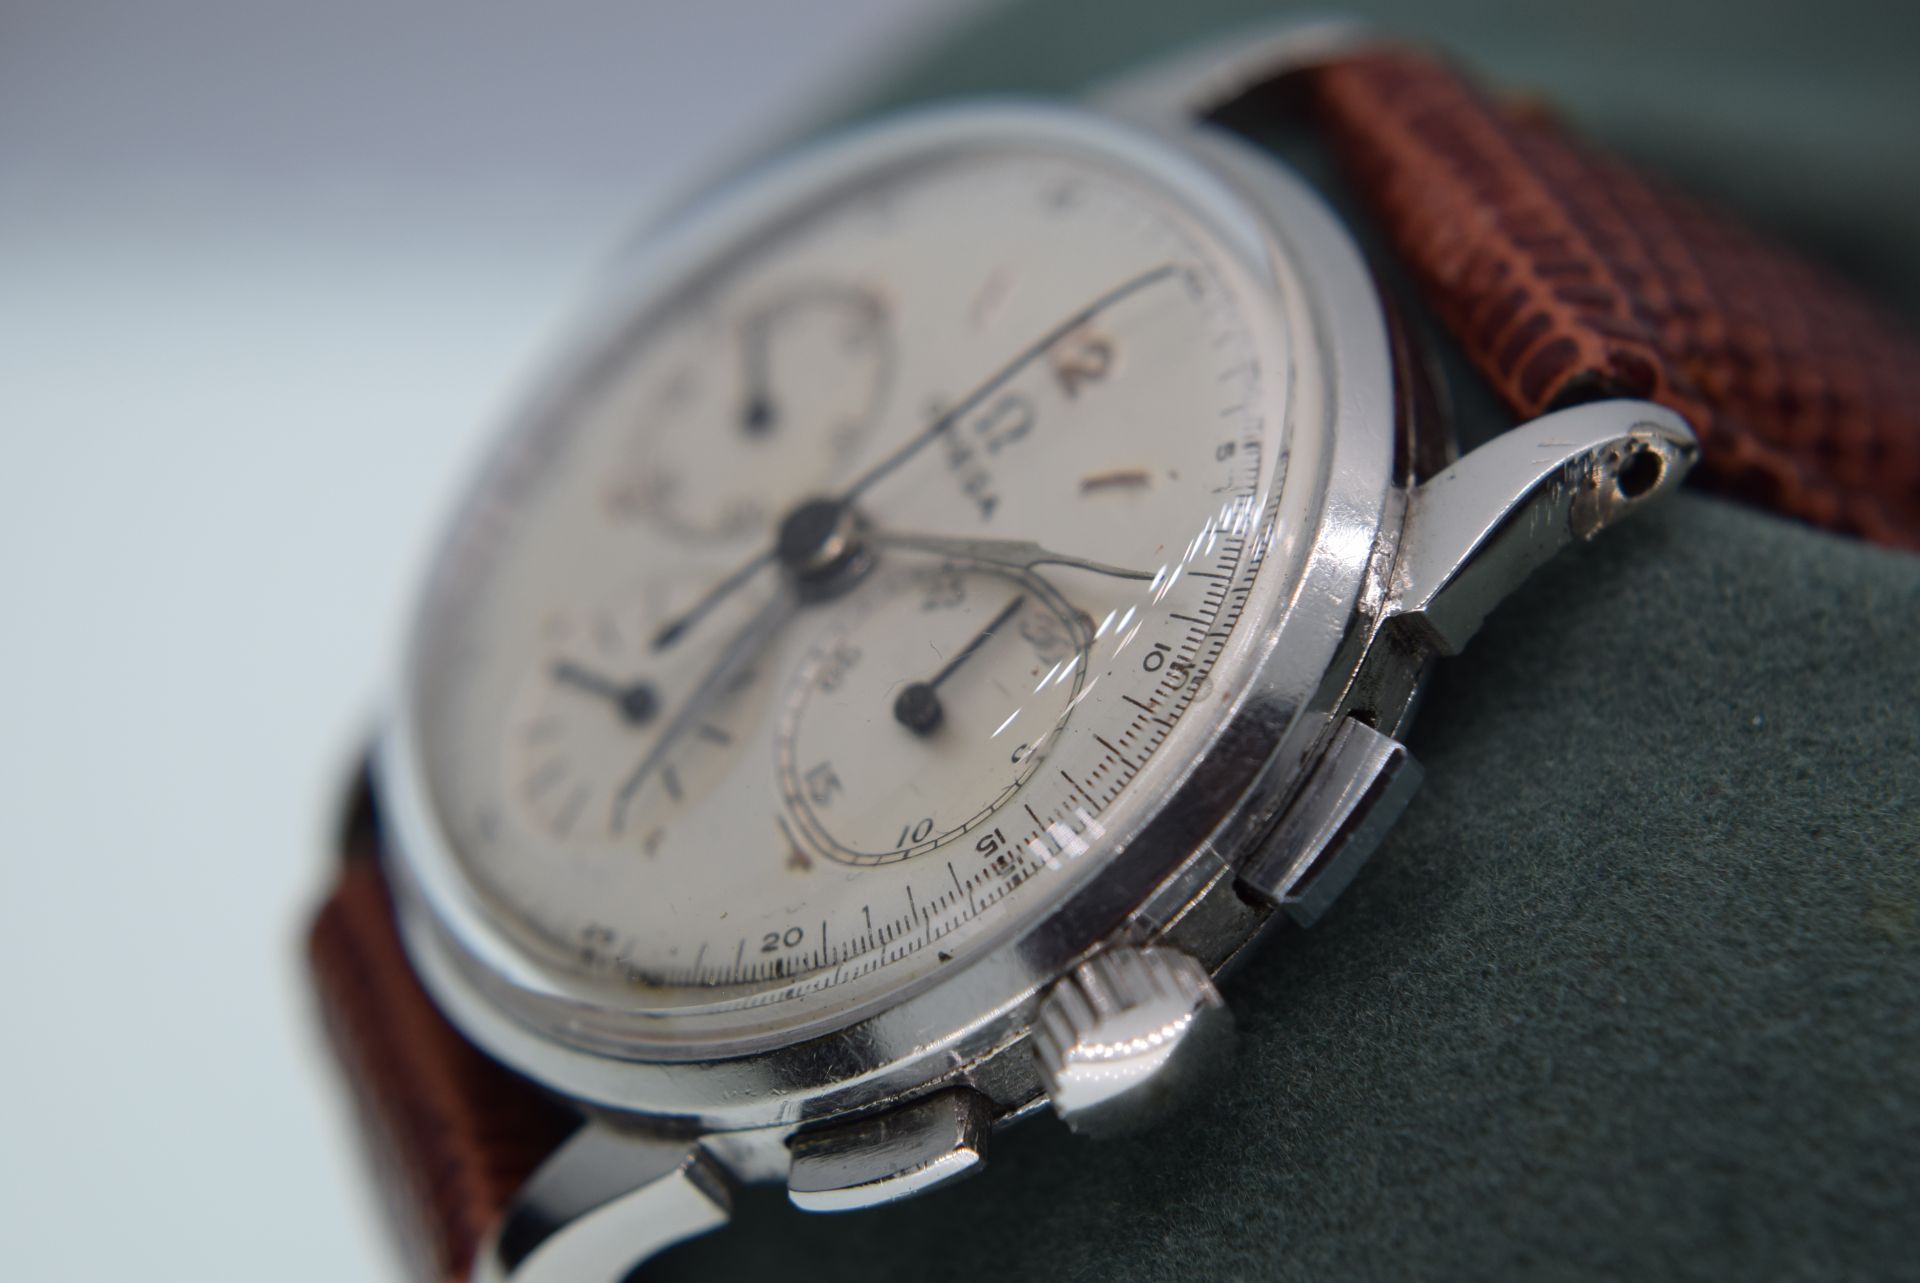 VINTAGE OMEGA WATCH WITH CHRONOGRAPH WITH OMEGA MANUAL WIND MOVEMENT - Image 4 of 5